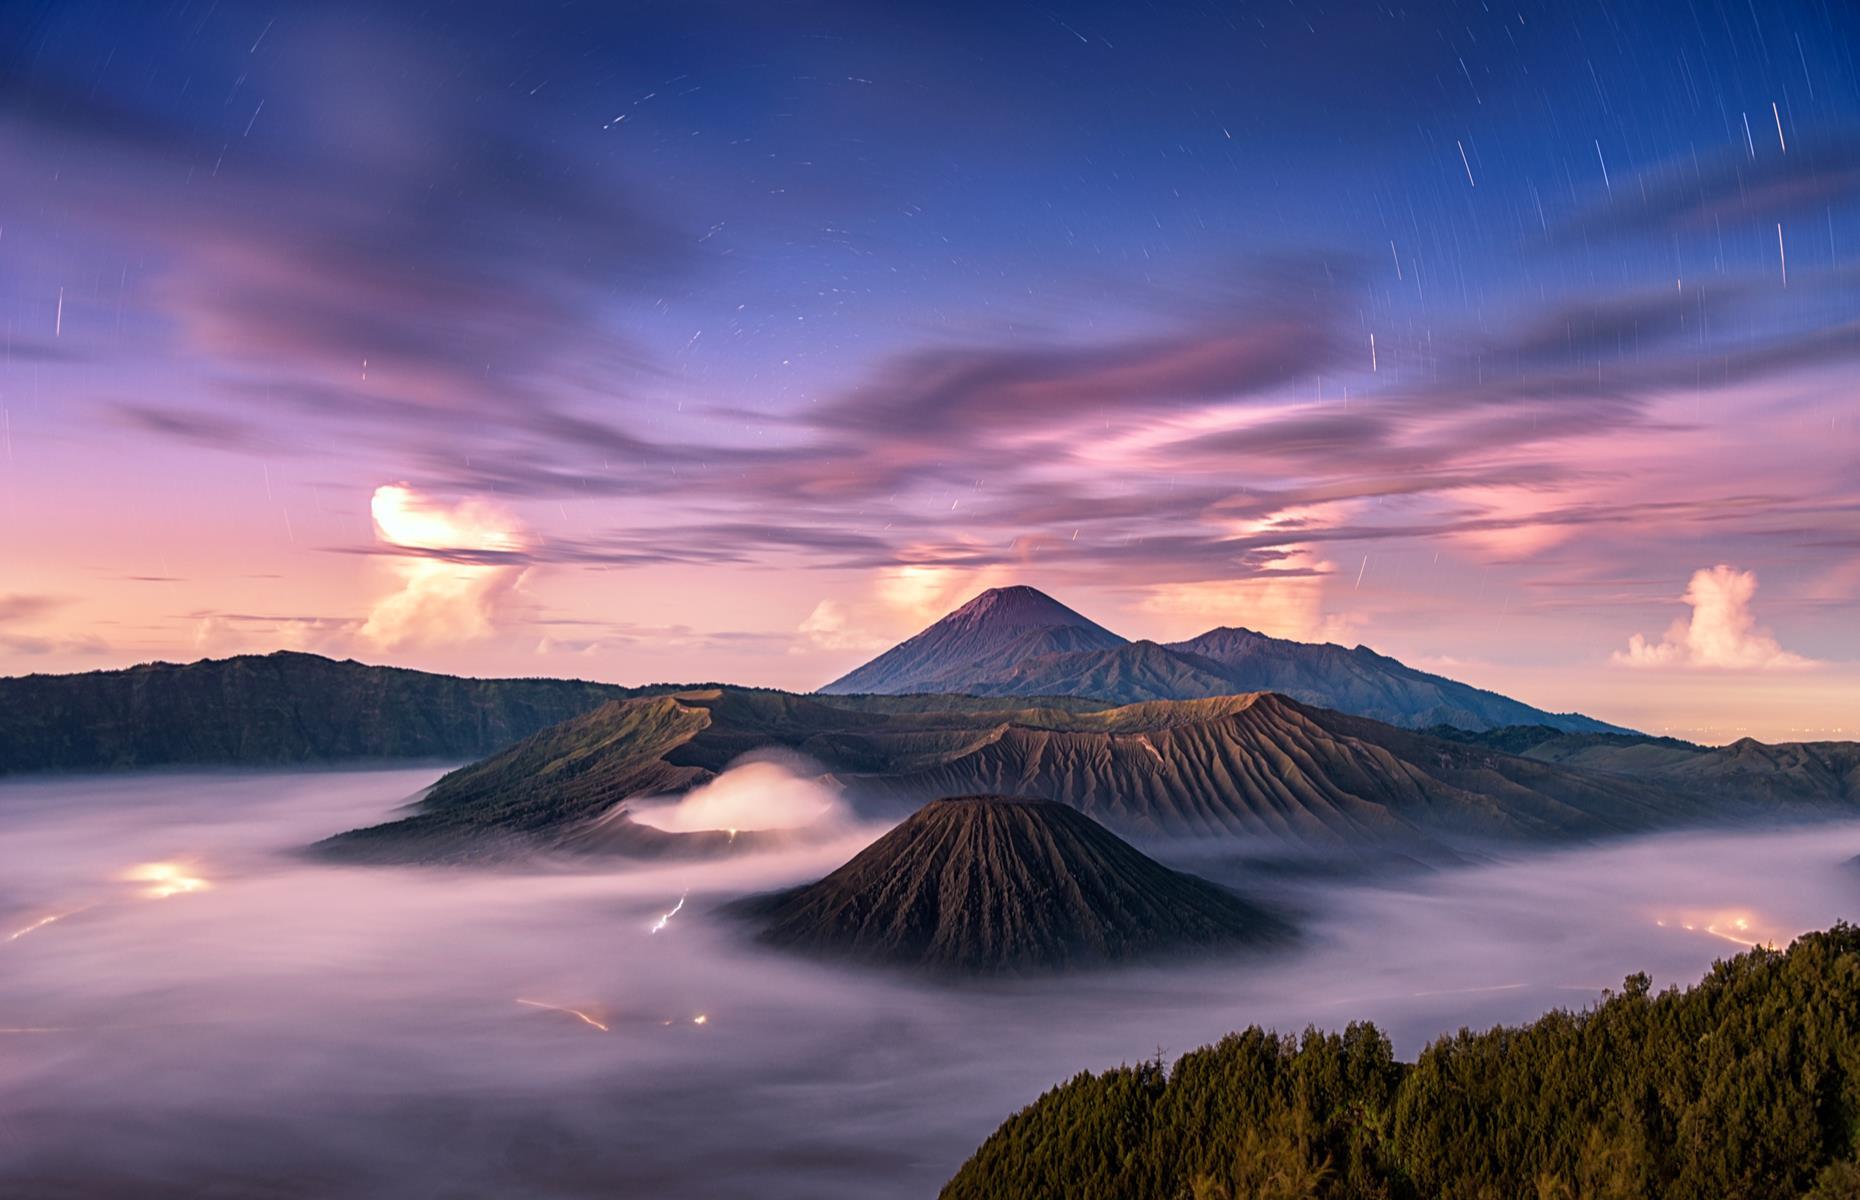 <p>Sitting on the Ring of Fire – a horseshoe-shaped area associated with most earthquakes and volcanic eruptions – at the edge of the Pacific Ocean, East Java is home to the <a href="https://www.indonesia.travel/uk/en/destinations/java/bromo-tengger-semeru-national-park">Bromo Tengger Semeru National Park</a>. This vast sandy caldera boasts the famous smoking Mount Bromo that towers and impressive 7,641 feet (2,329m).</p>